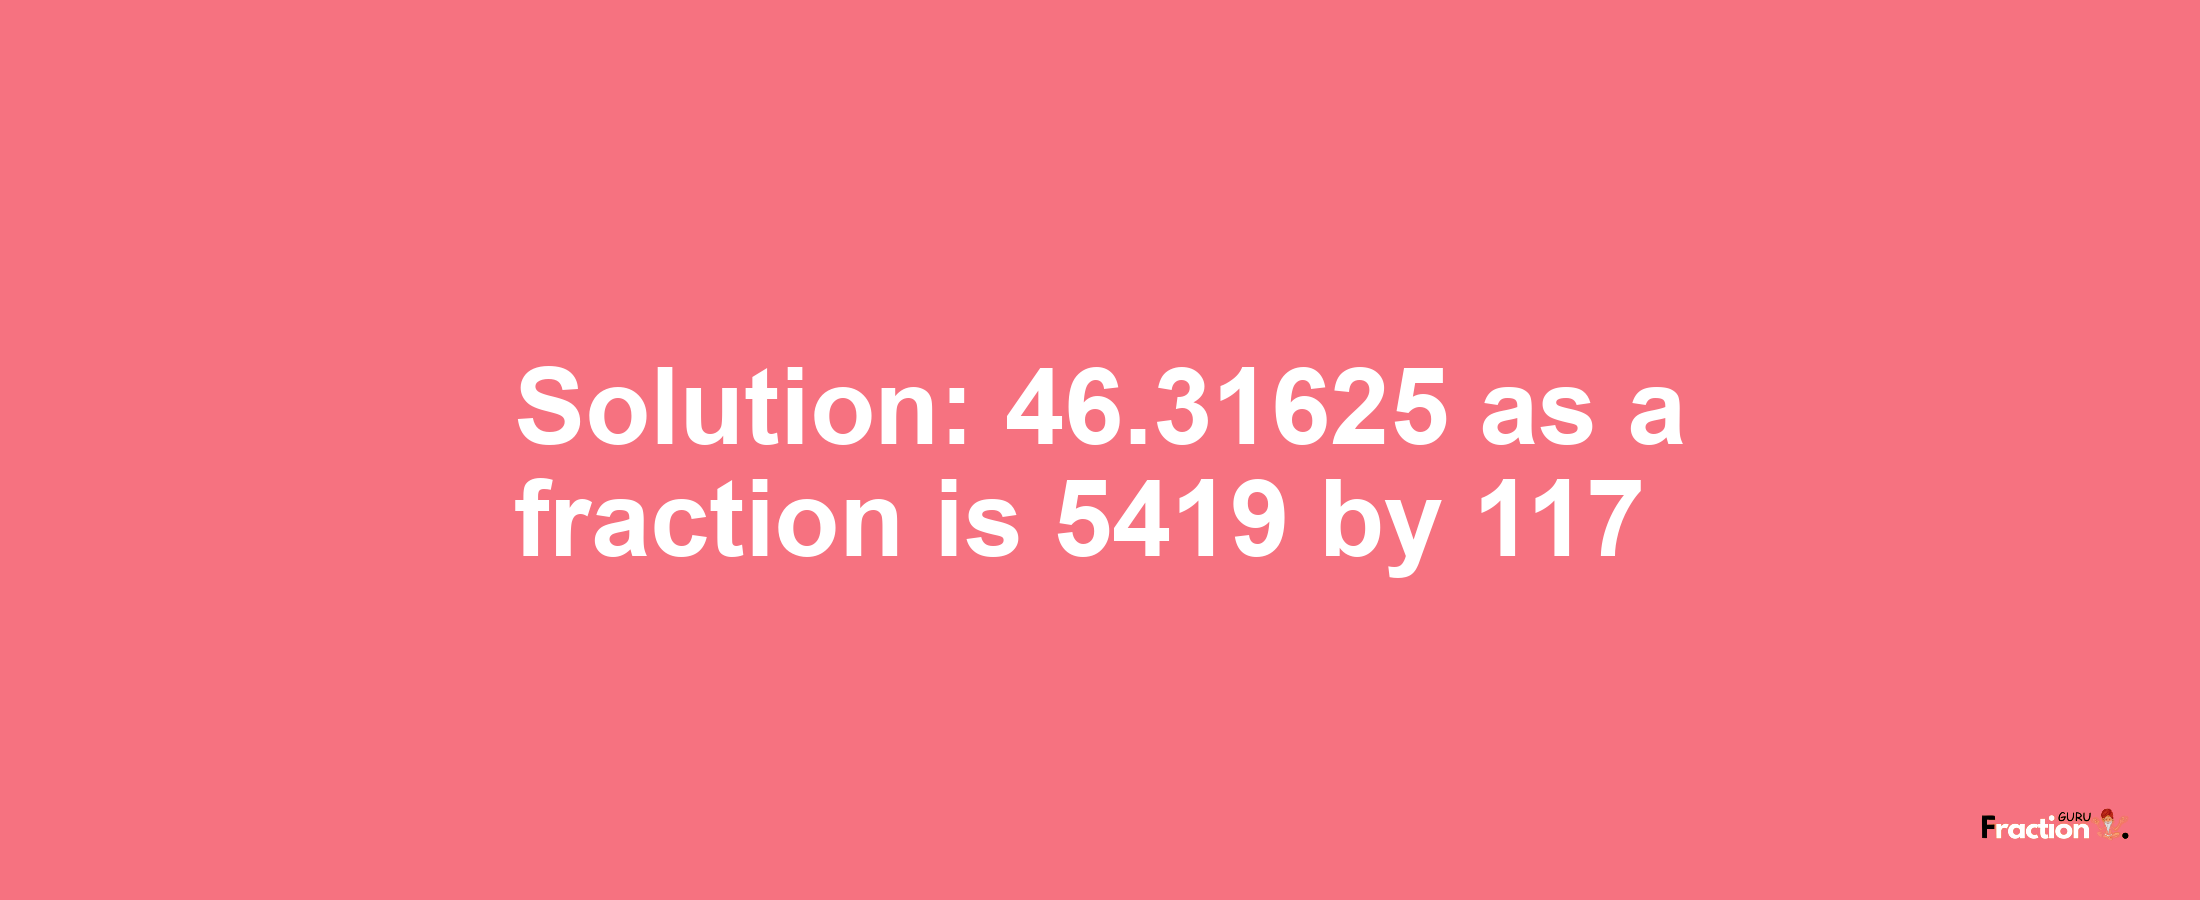 Solution:46.31625 as a fraction is 5419/117